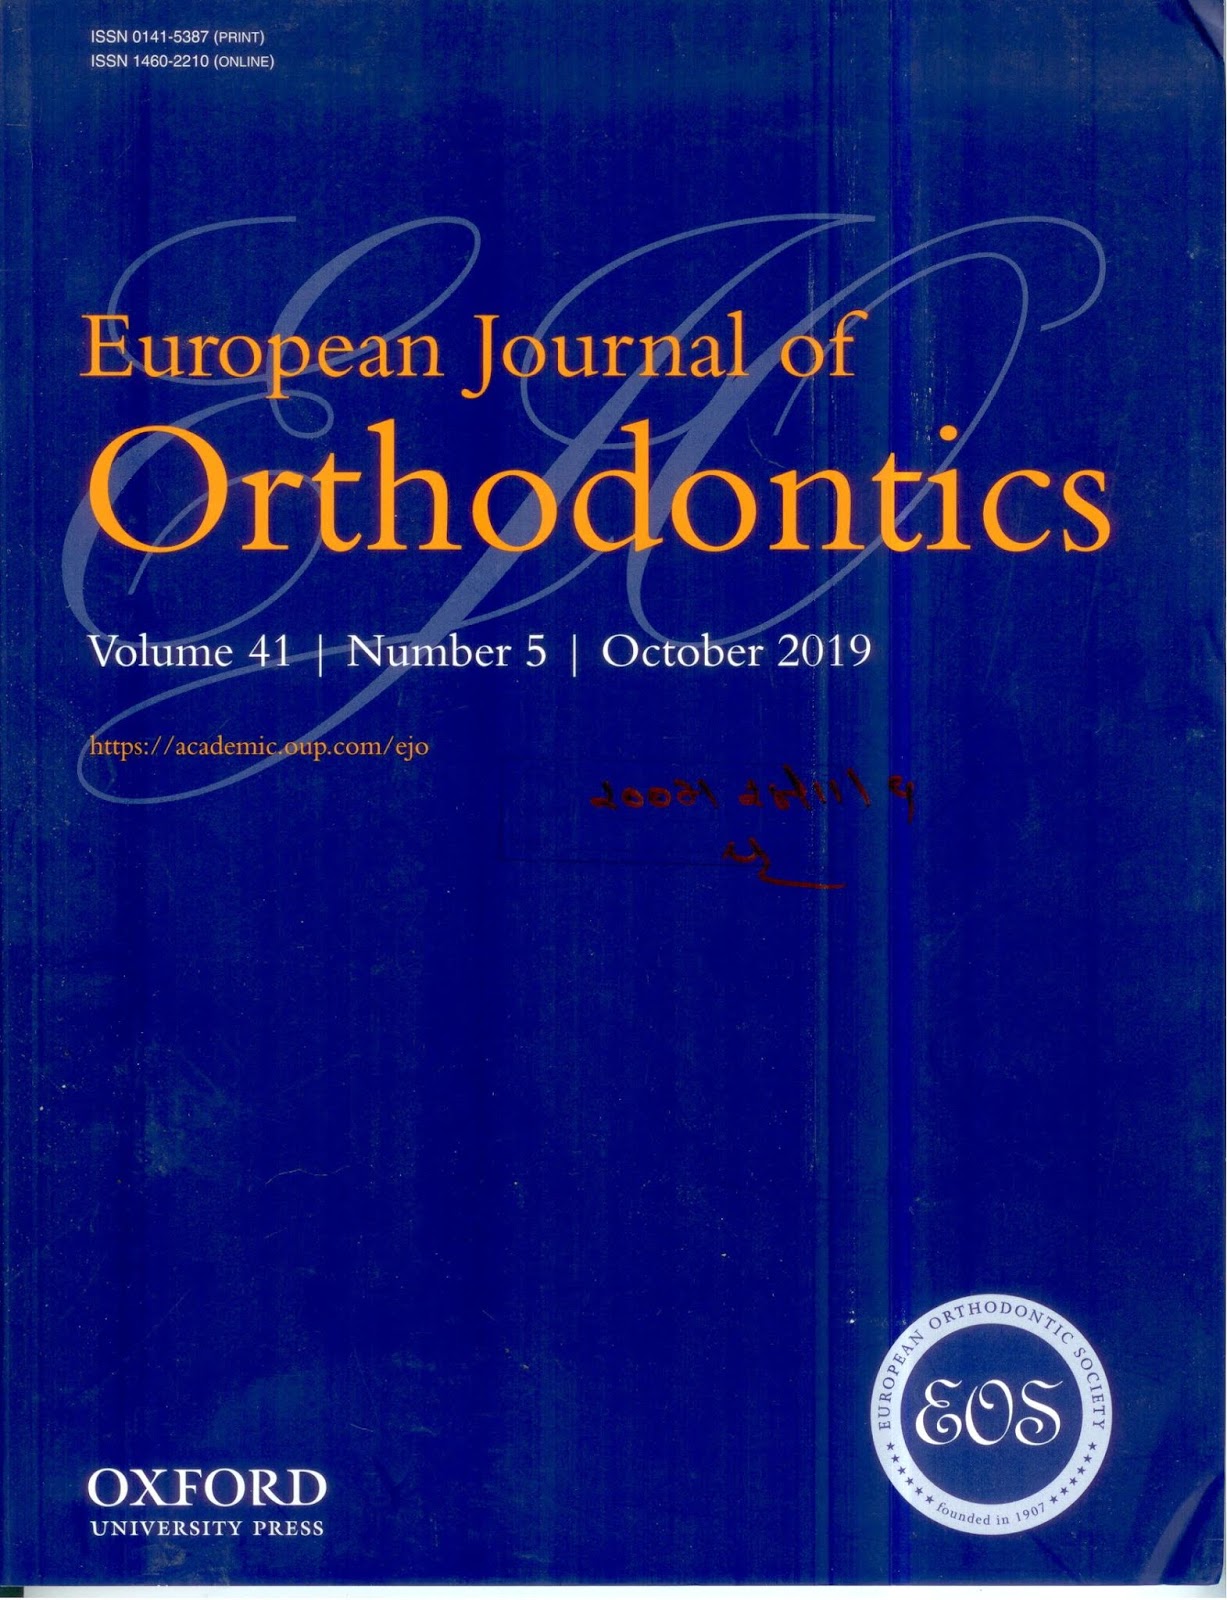 https://academic.oup.com/ejo/issue/41/5